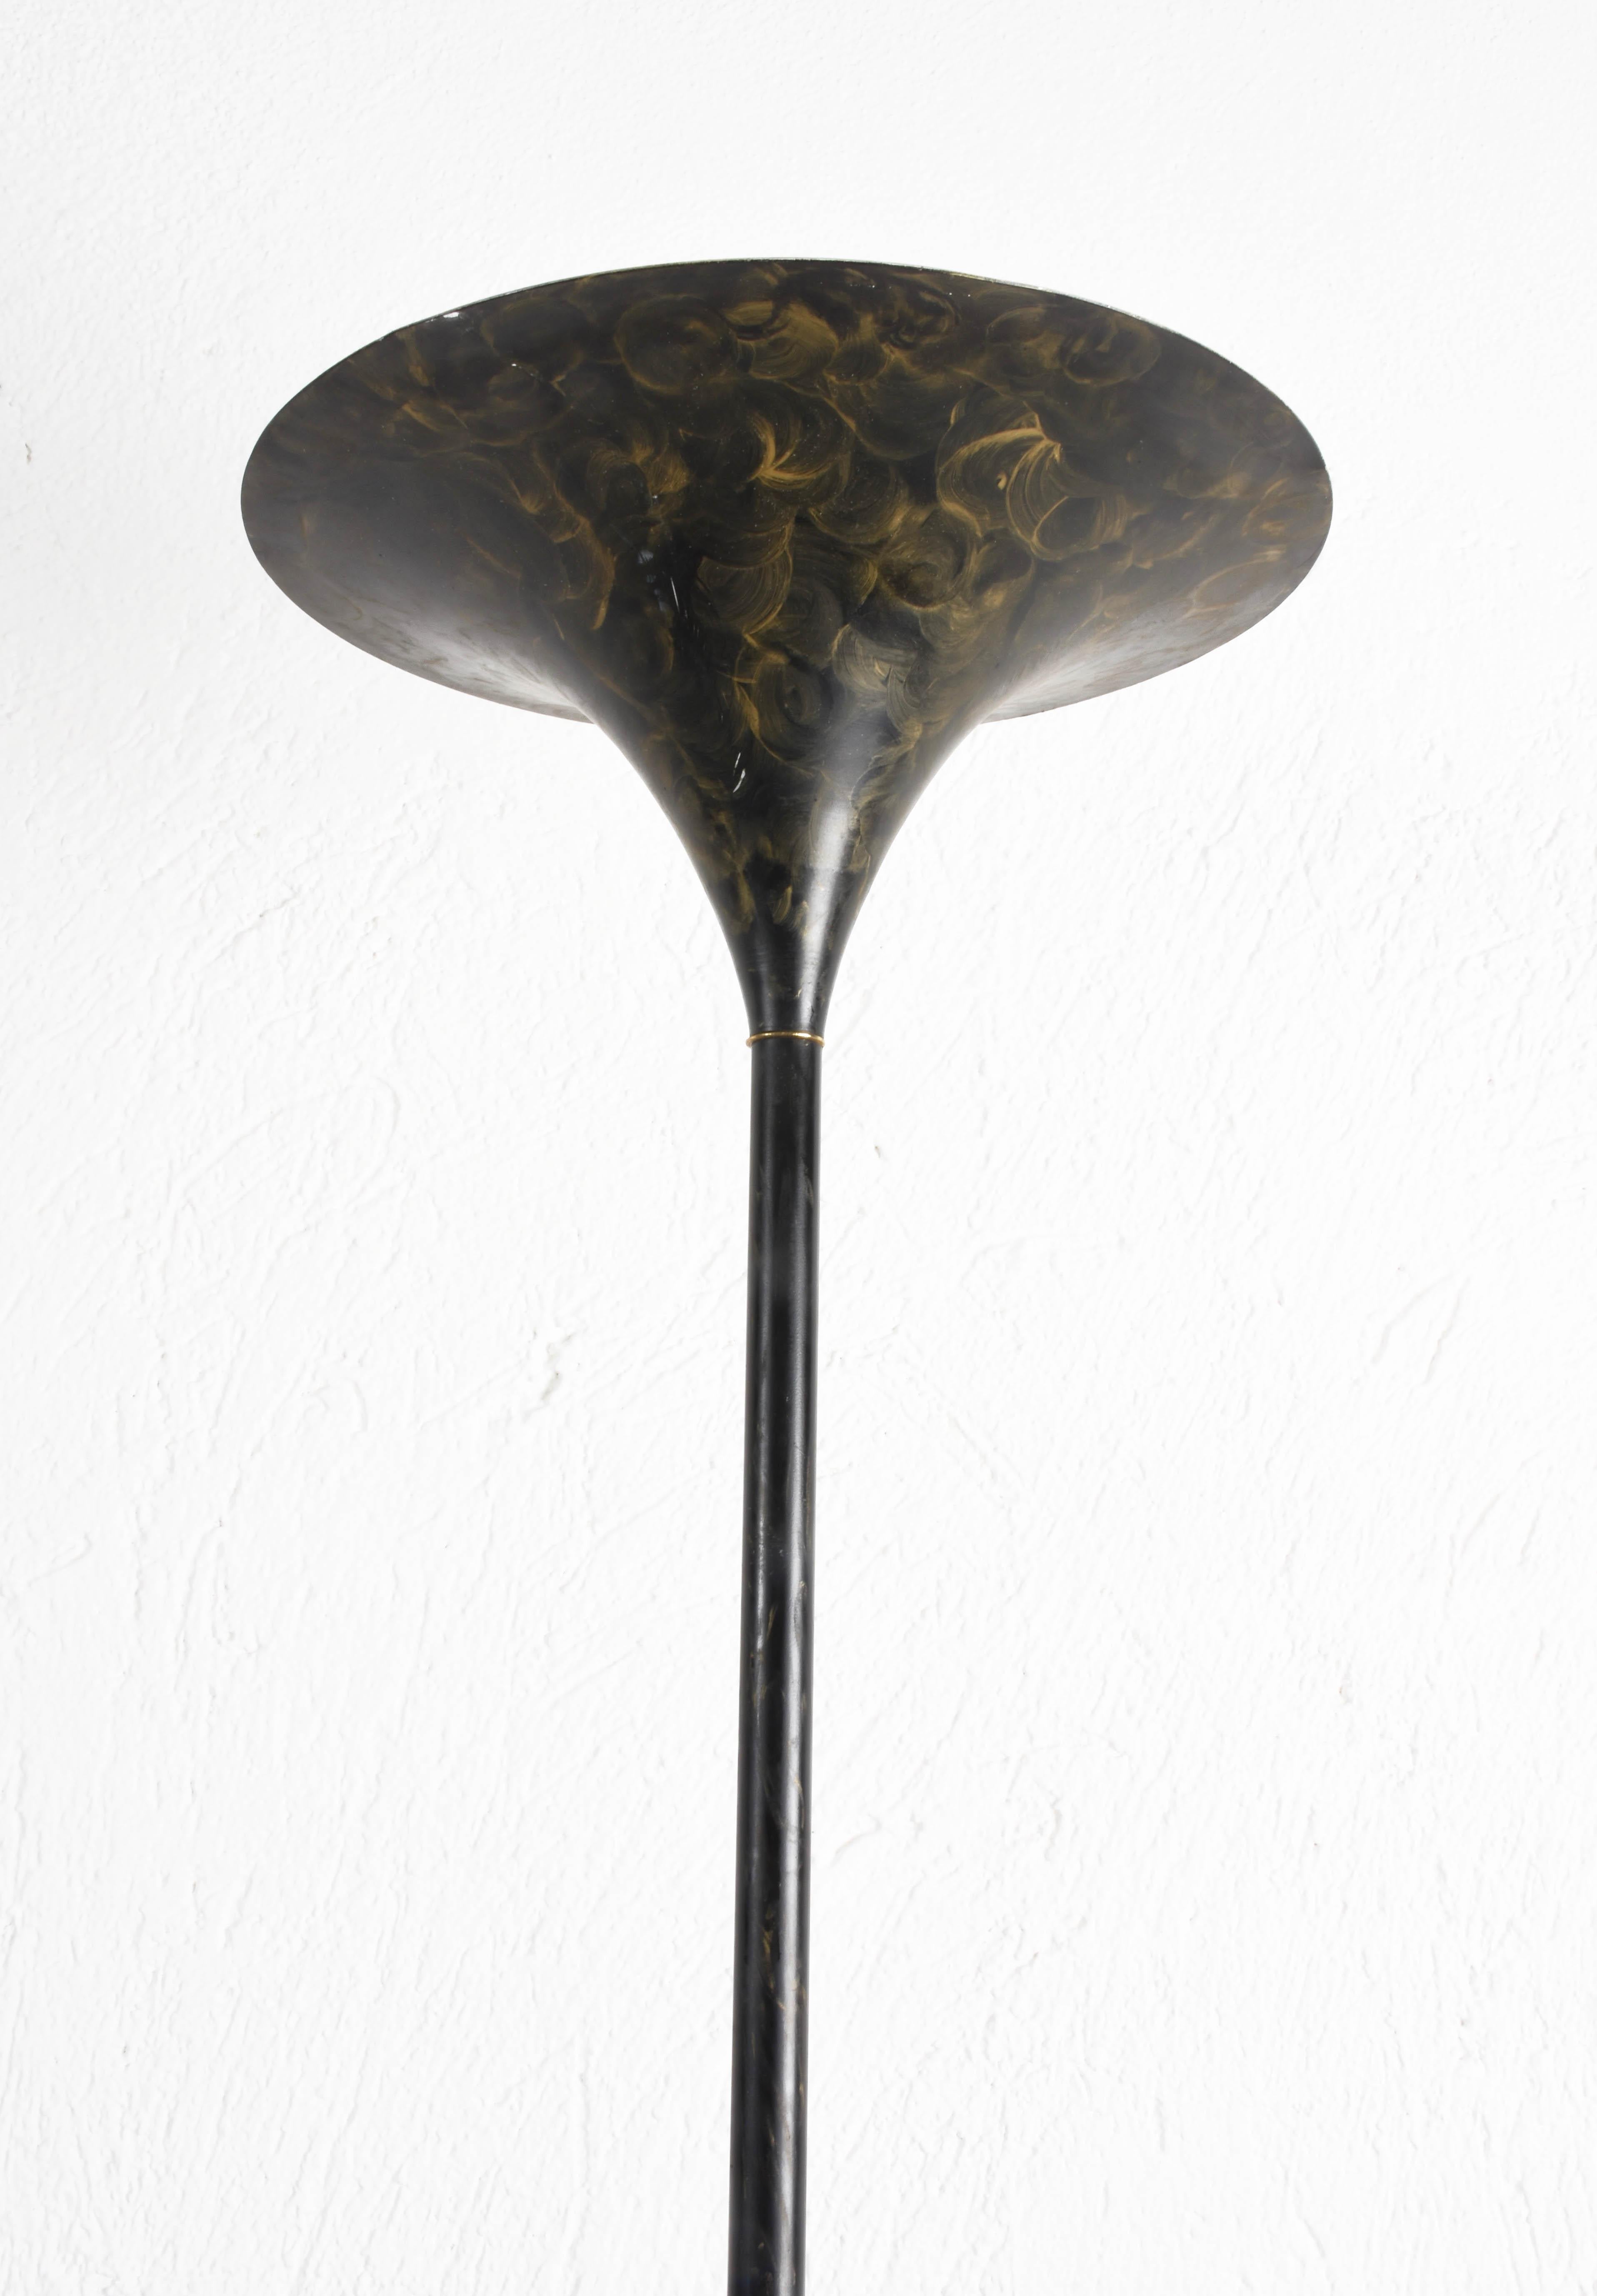 Italian floor lamp in gold decorated aluminum. Mount a large E24 bulb.
Fair vintage conditions.